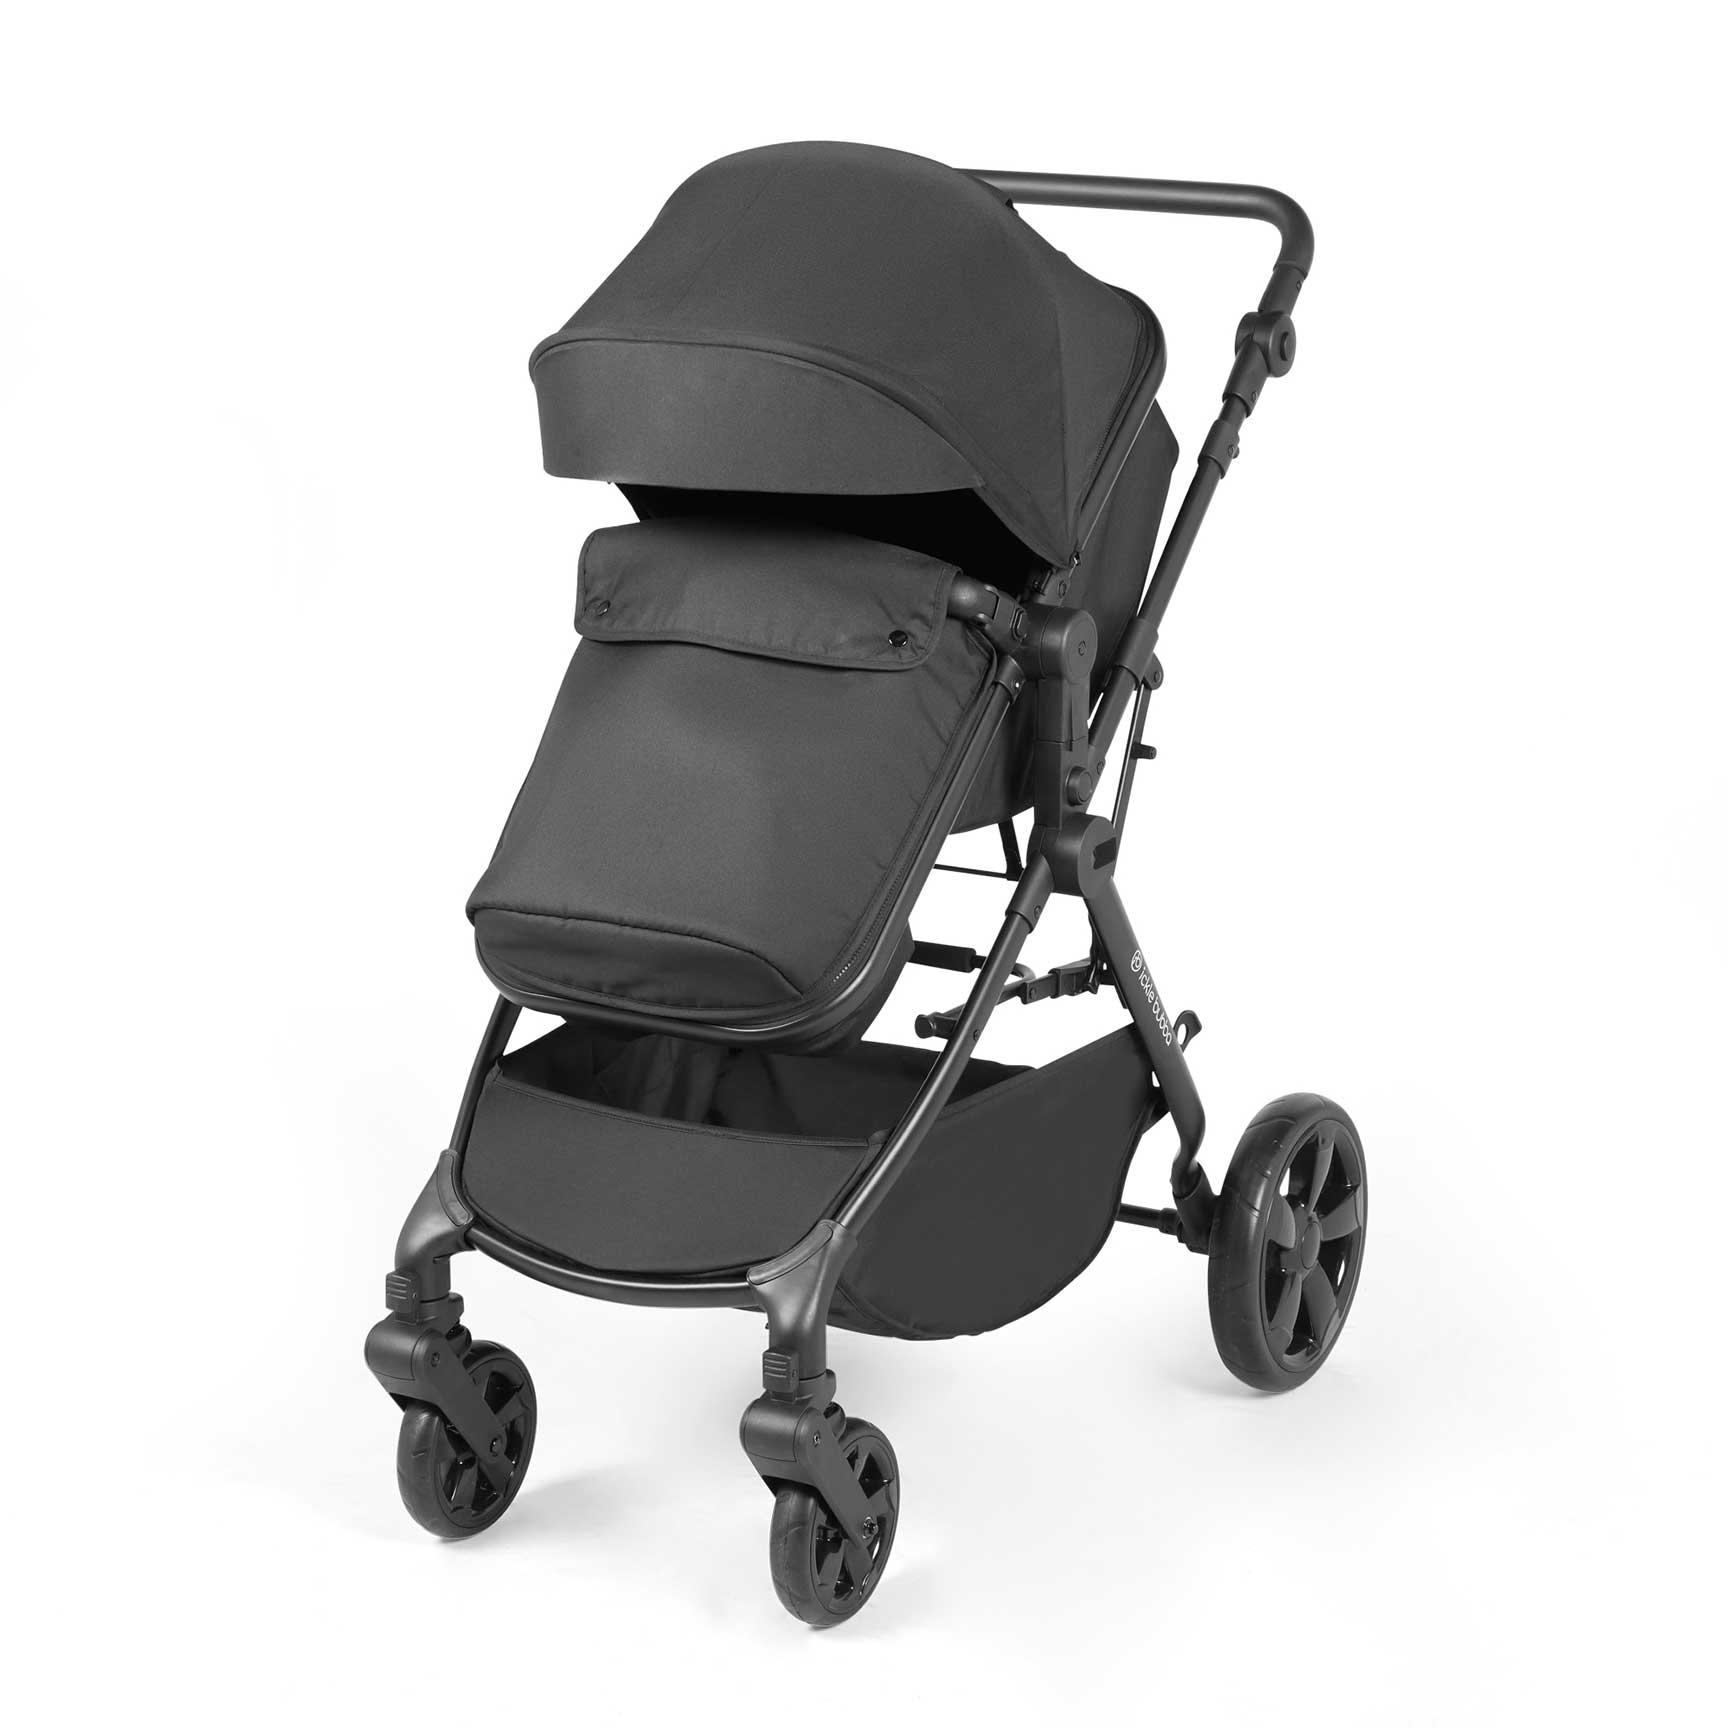 Ickle Bubba Comet All-in-One I-Size Travel System with Isofix Base in Black Baby Prams 10-008-300-002 5056515025798